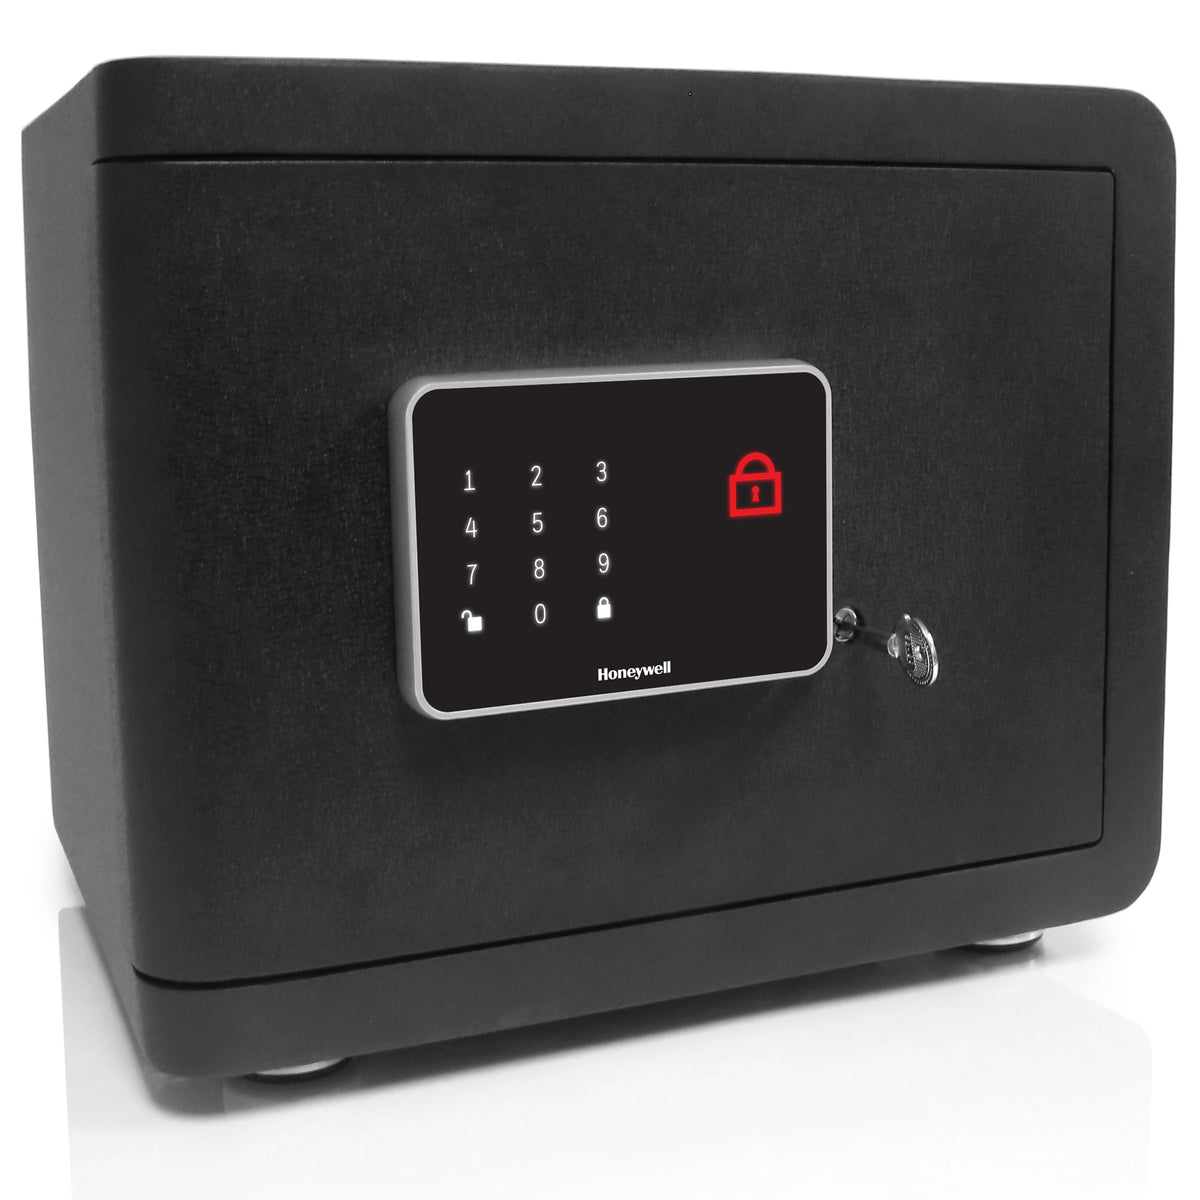 Honeywell 5403 Bluetooth Smart Security Safe Closed with Key